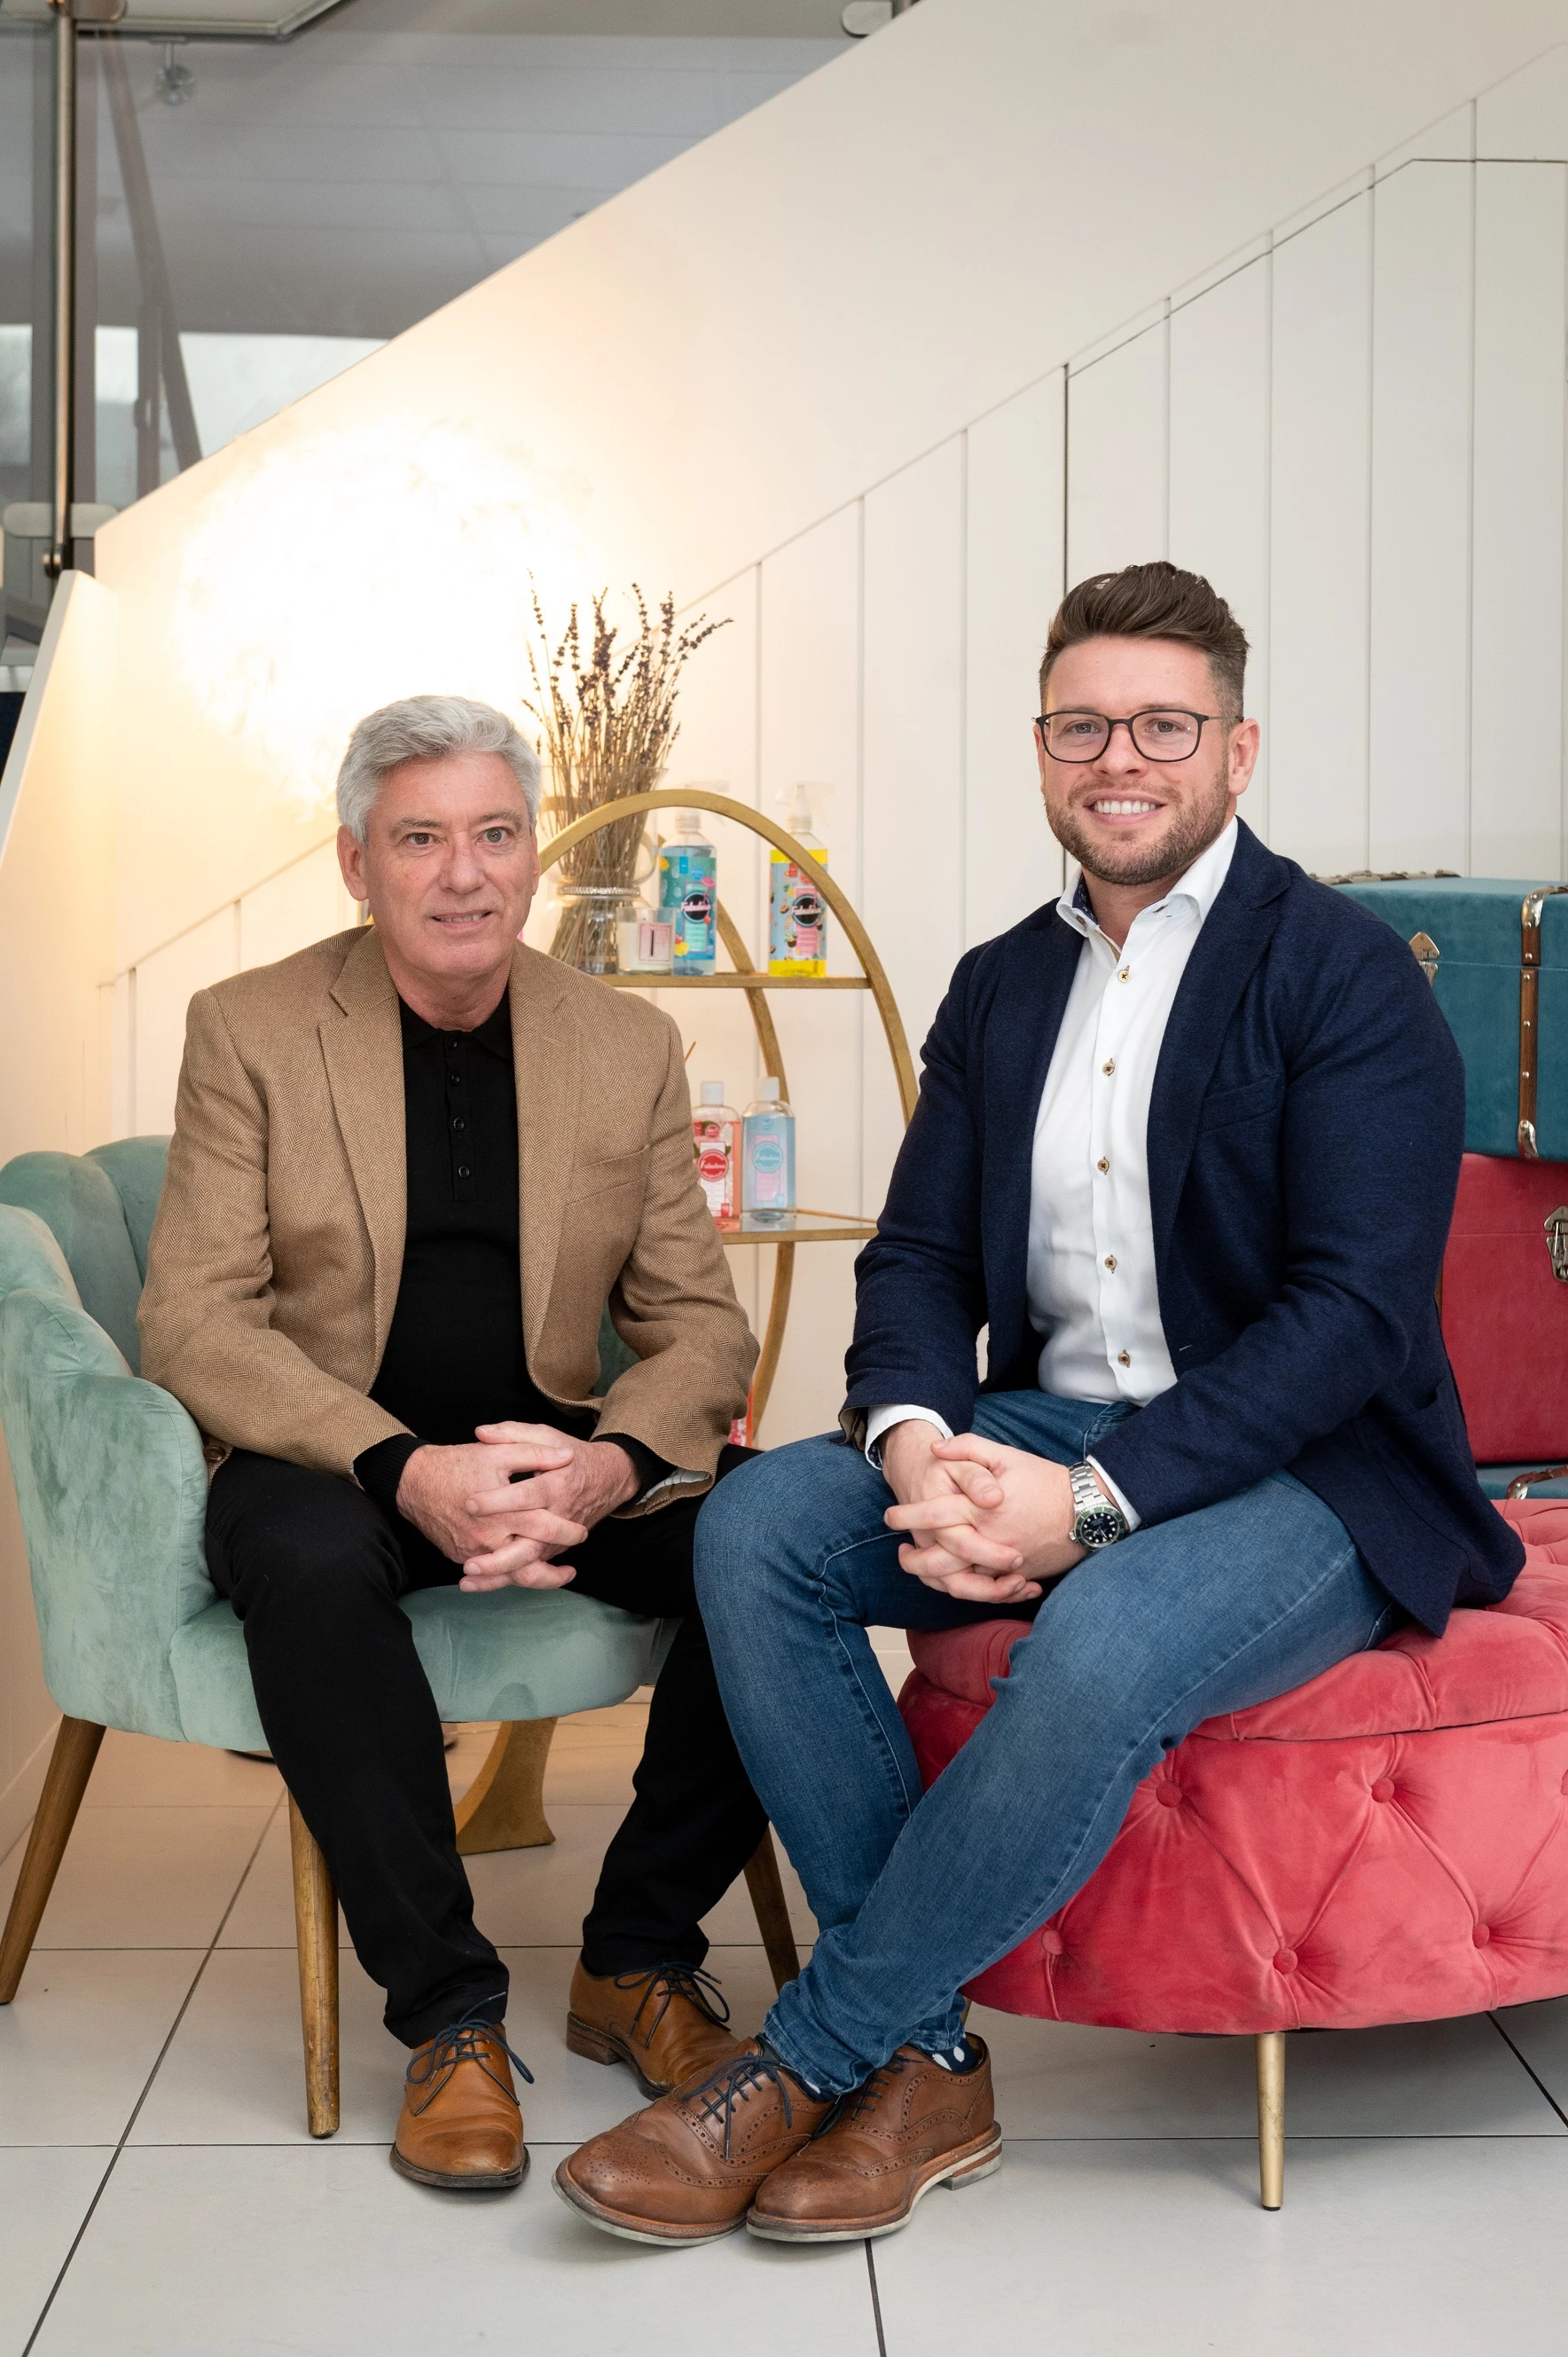 Mike and James Sharpe, co-founders of Fabulosa